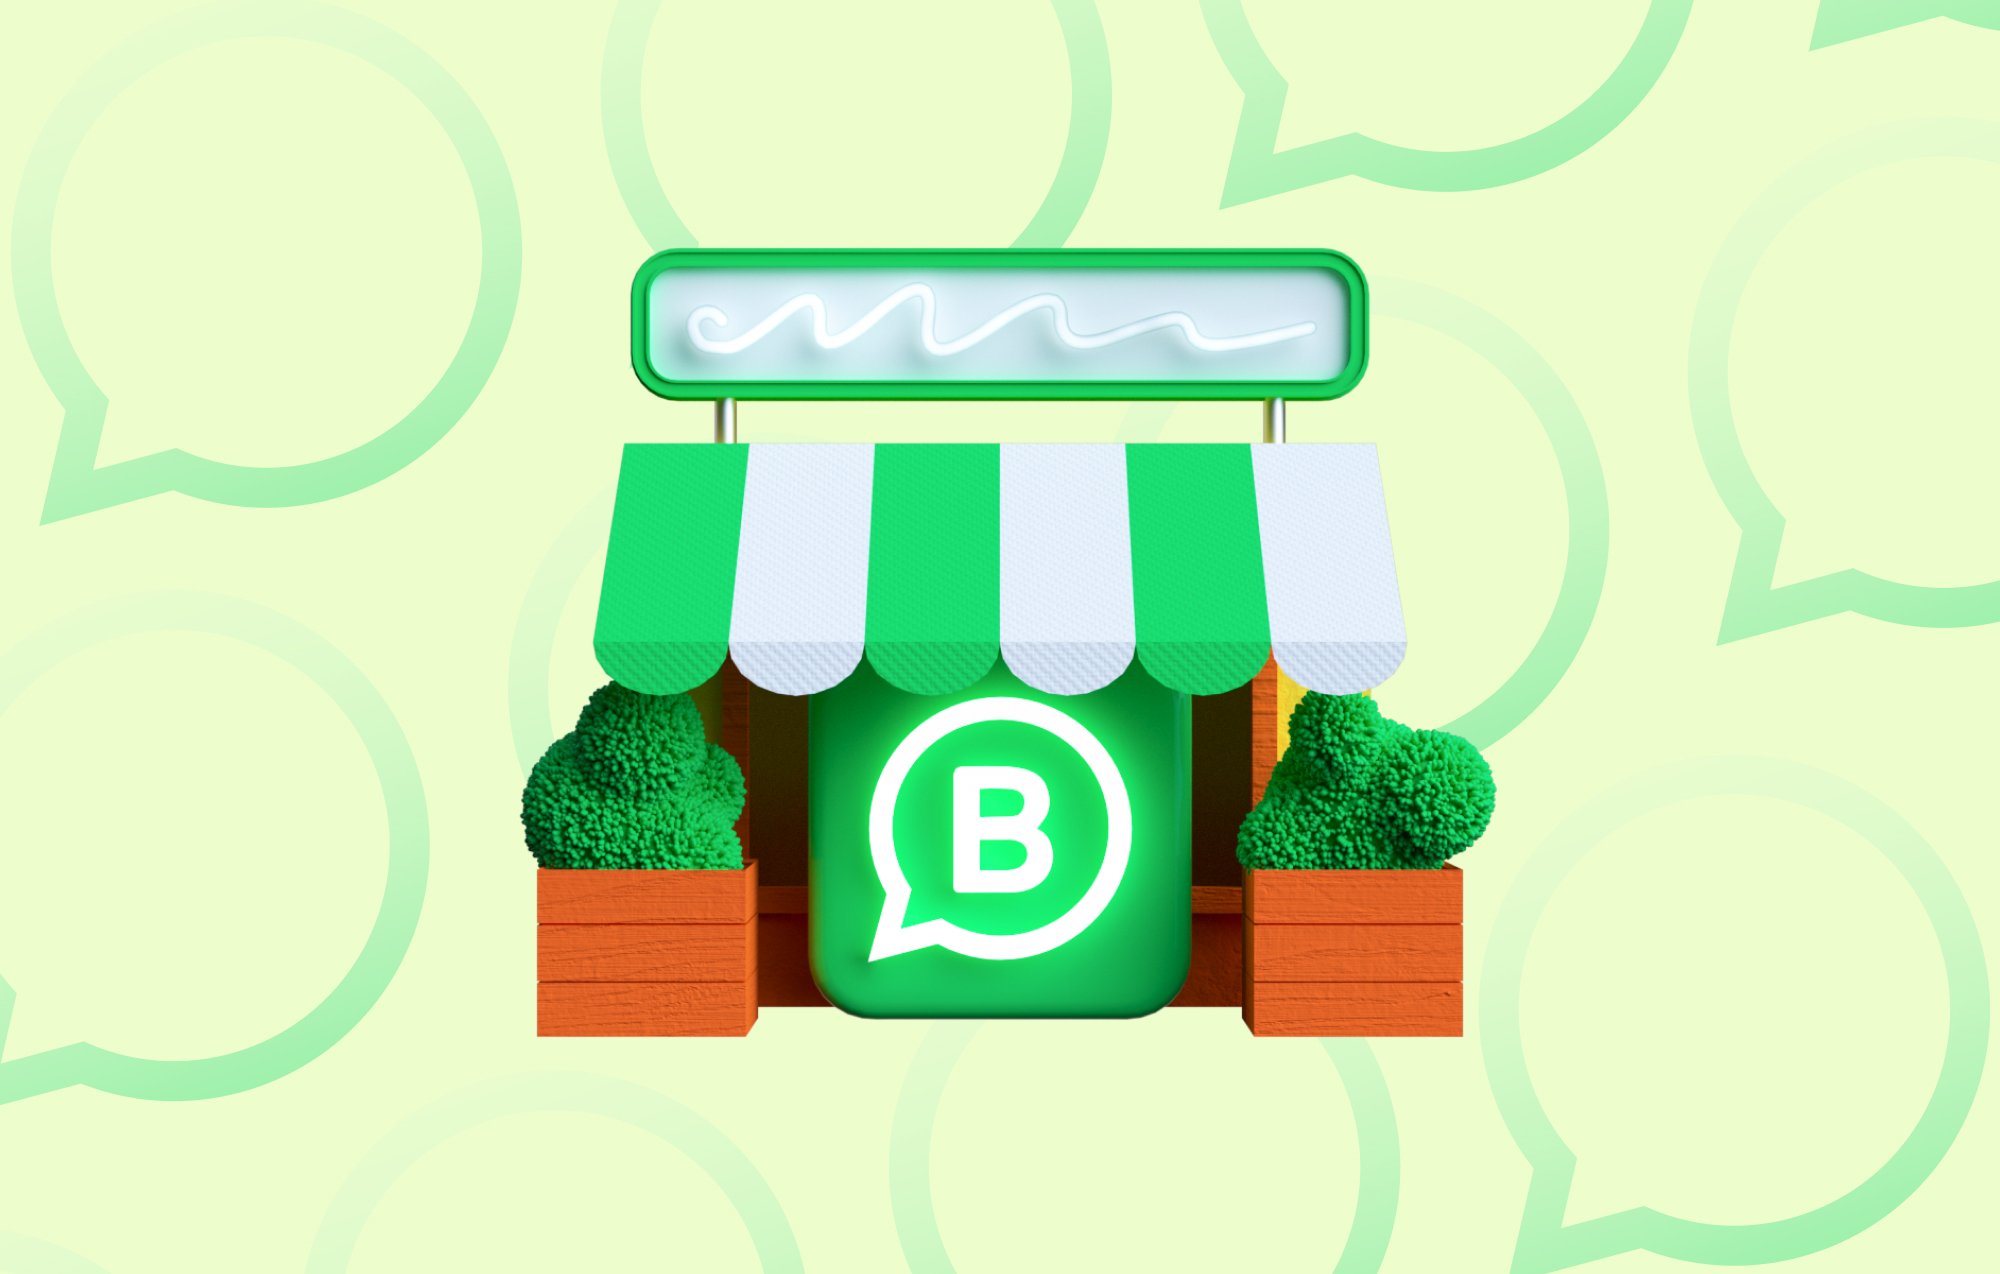 WhatsApp Business app article by charles: picture of a green and white market stall with the WhatsApp Business logo